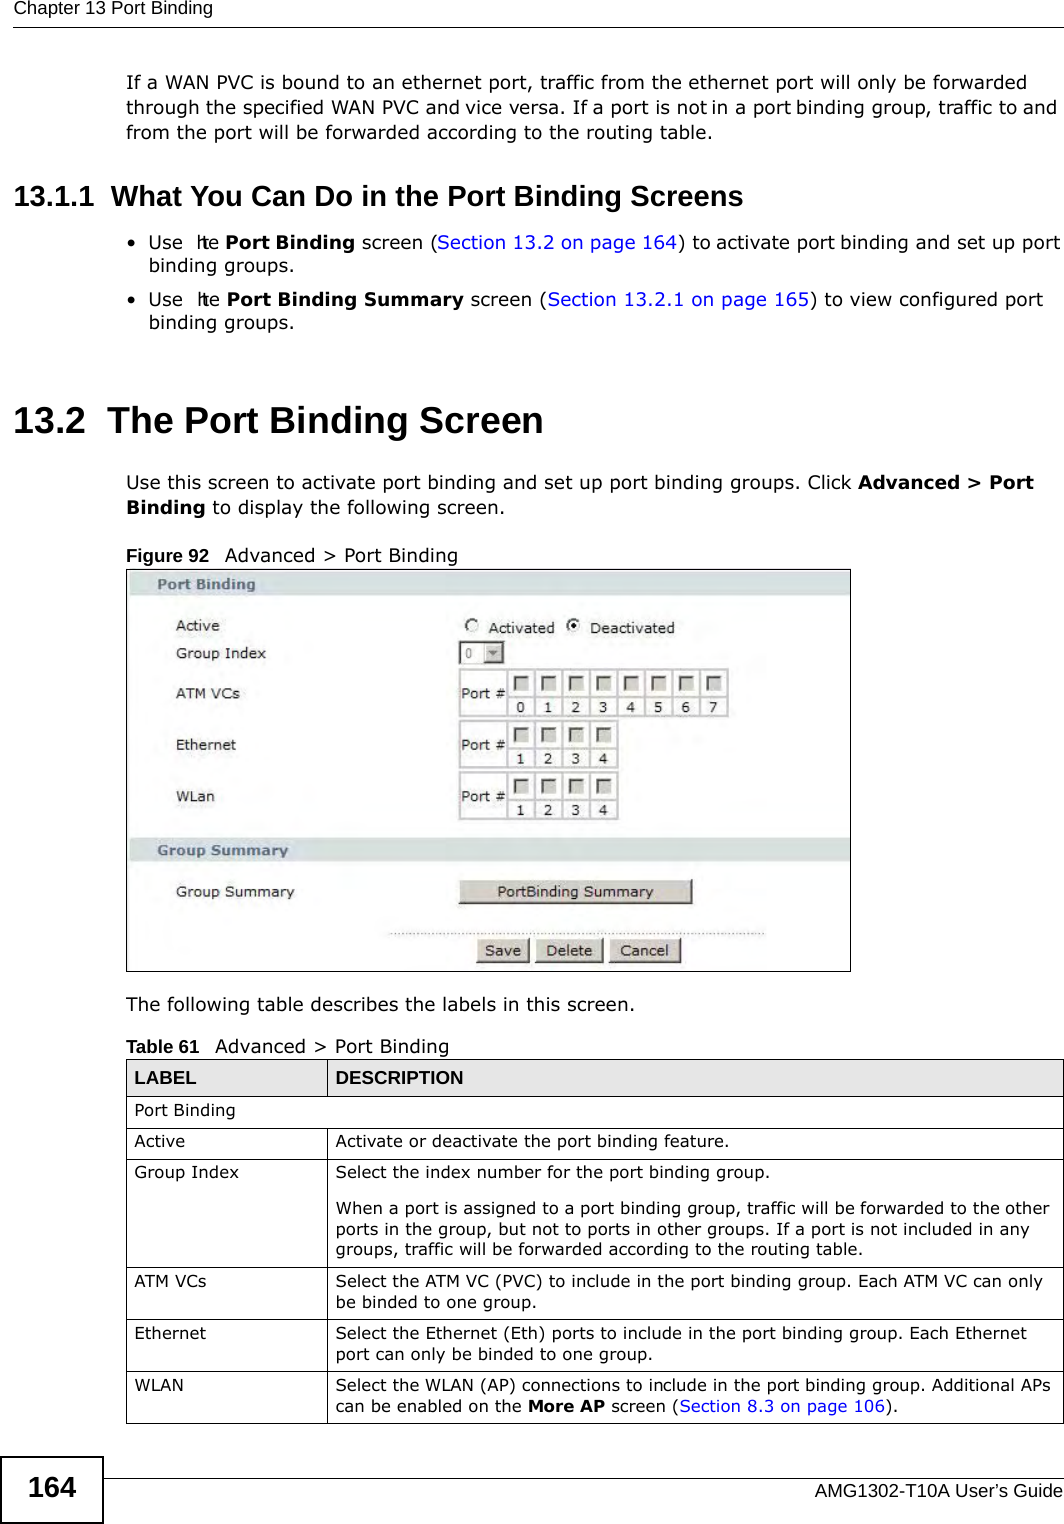 Chapter 13 Port BindingAMG1302-T10A User’s Guide164If a WAN PVC is bound to an ethernet port, traffic from the ethernet port will only be forwarded through the specified WAN PVC and vice versa. If a port is not in a port binding group, traffic to and from the port will be forwarded according to the routing table. 13.1.1  What You Can Do in the Port Binding Screens•Use  the Port Binding screen (Section 13.2 on page 164) to activate port binding and set up port binding groups.•Use  the Port Binding Summary screen (Section 13.2.1 on page 165) to view configured port binding groups.13.2  The Port Binding ScreenUse this screen to activate port binding and set up port binding groups. Click Advanced &gt; Port Binding to display the following screen.Figure 92   Advanced &gt; Port BindingThe following table describes the labels in this screen. Table 61   Advanced &gt; Port BindingLABEL DESCRIPTIONPort BindingActive Activate or deactivate the port binding feature.Group Index Select the index number for the port binding group. When a port is assigned to a port binding group, traffic will be forwarded to the other ports in the group, but not to ports in other groups. If a port is not included in any groups, traffic will be forwarded according to the routing table.ATM VCs Select the ATM VC (PVC) to include in the port binding group. Each ATM VC can only be binded to one group.Ethernet Select the Ethernet (Eth) ports to include in the port binding group. Each Ethernet port can only be binded to one group.WLAN Select the WLAN (AP) connections to include in the port binding group. Additional APs can be enabled on the More AP screen (Section 8.3 on page 106).